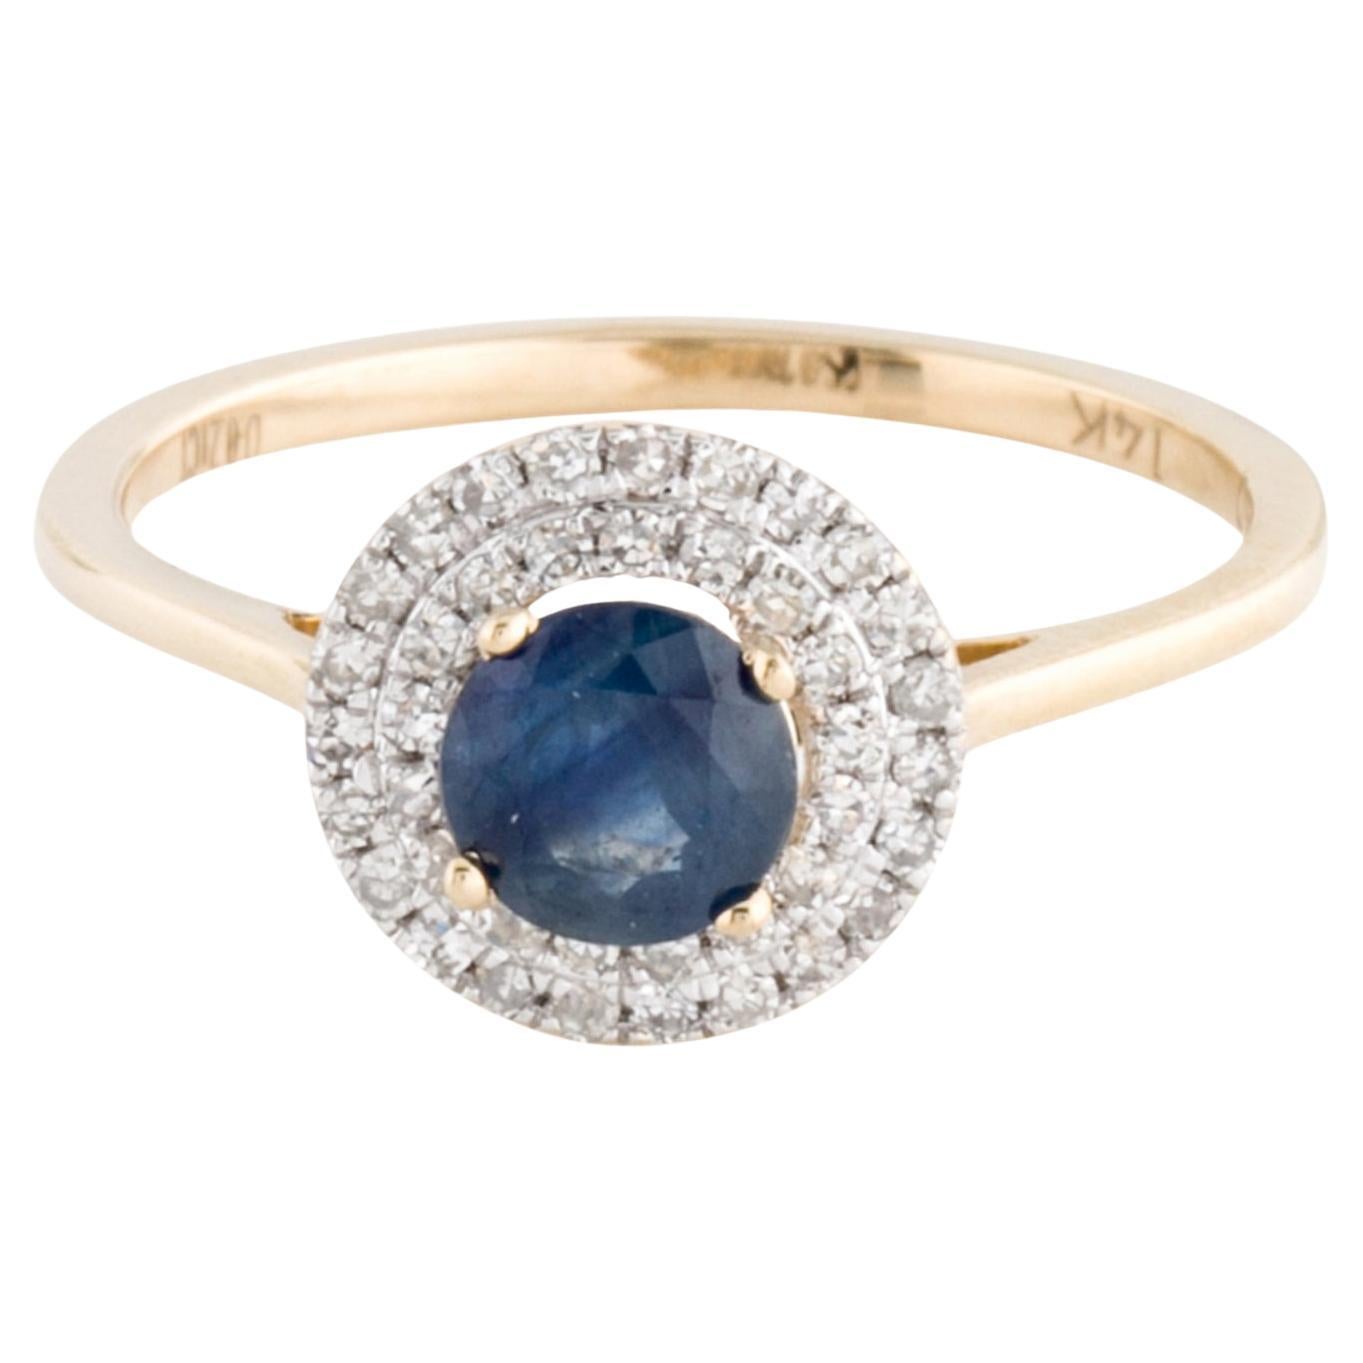 Luxurious 14K Sapphire & Diamond Cocktail Ring - Size 6.5 Vintage Gemstone Rin For Sale